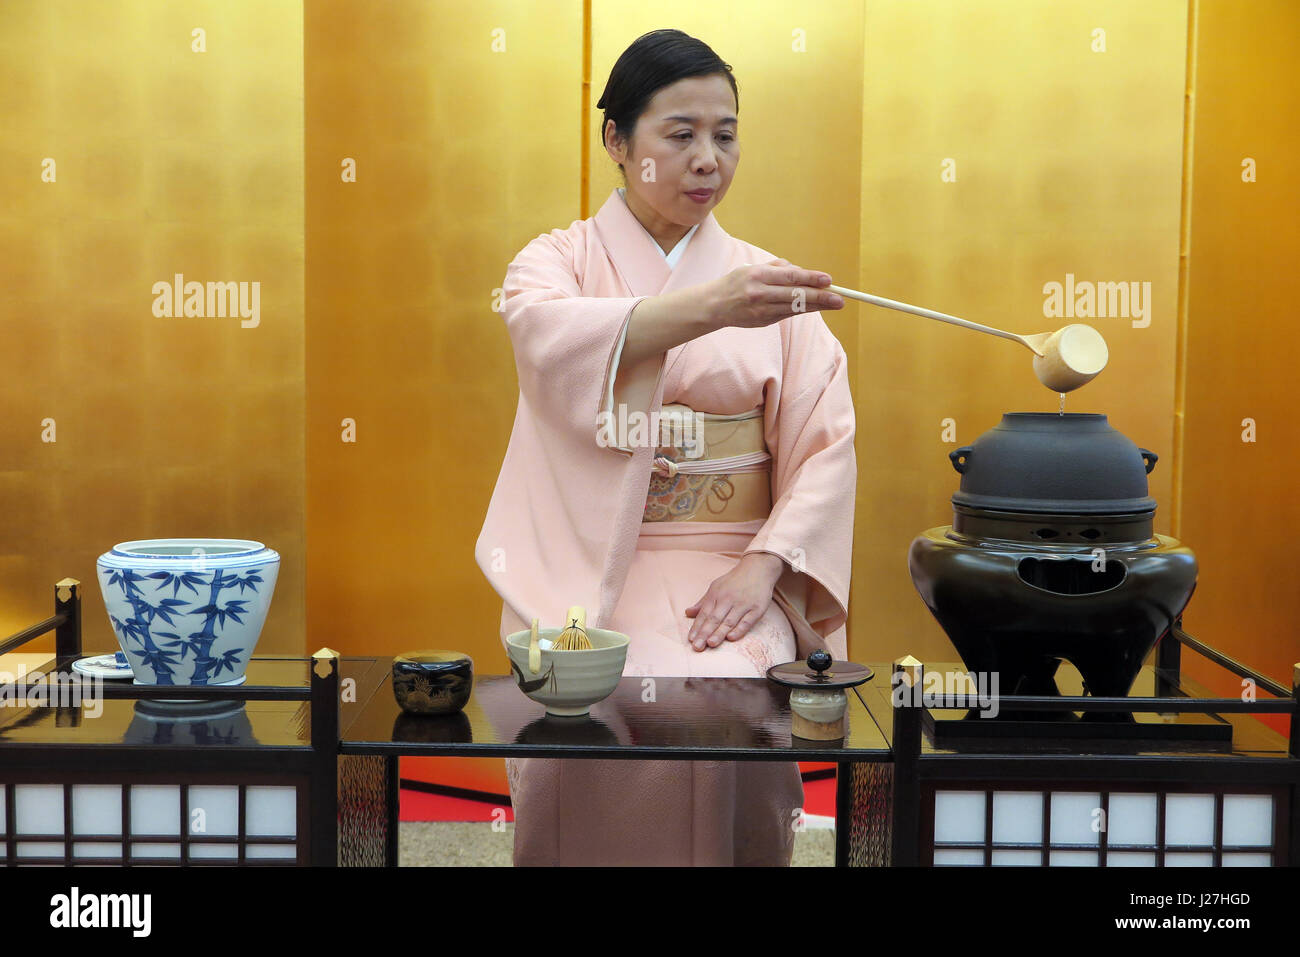 Tokyo, Japan. 20th Apr, 2017. Fuki Wanibe from Japan performs a traditional tea cremony at the Tokyo National Museum in Tokyo, Japan, 20 April 2017. The exhibition 'Chanoyu' presents the art of the tea ceremony until 4 June 2017. Photo: Lars Nicolaysen/dpa/Alamy Live News Stock Photo